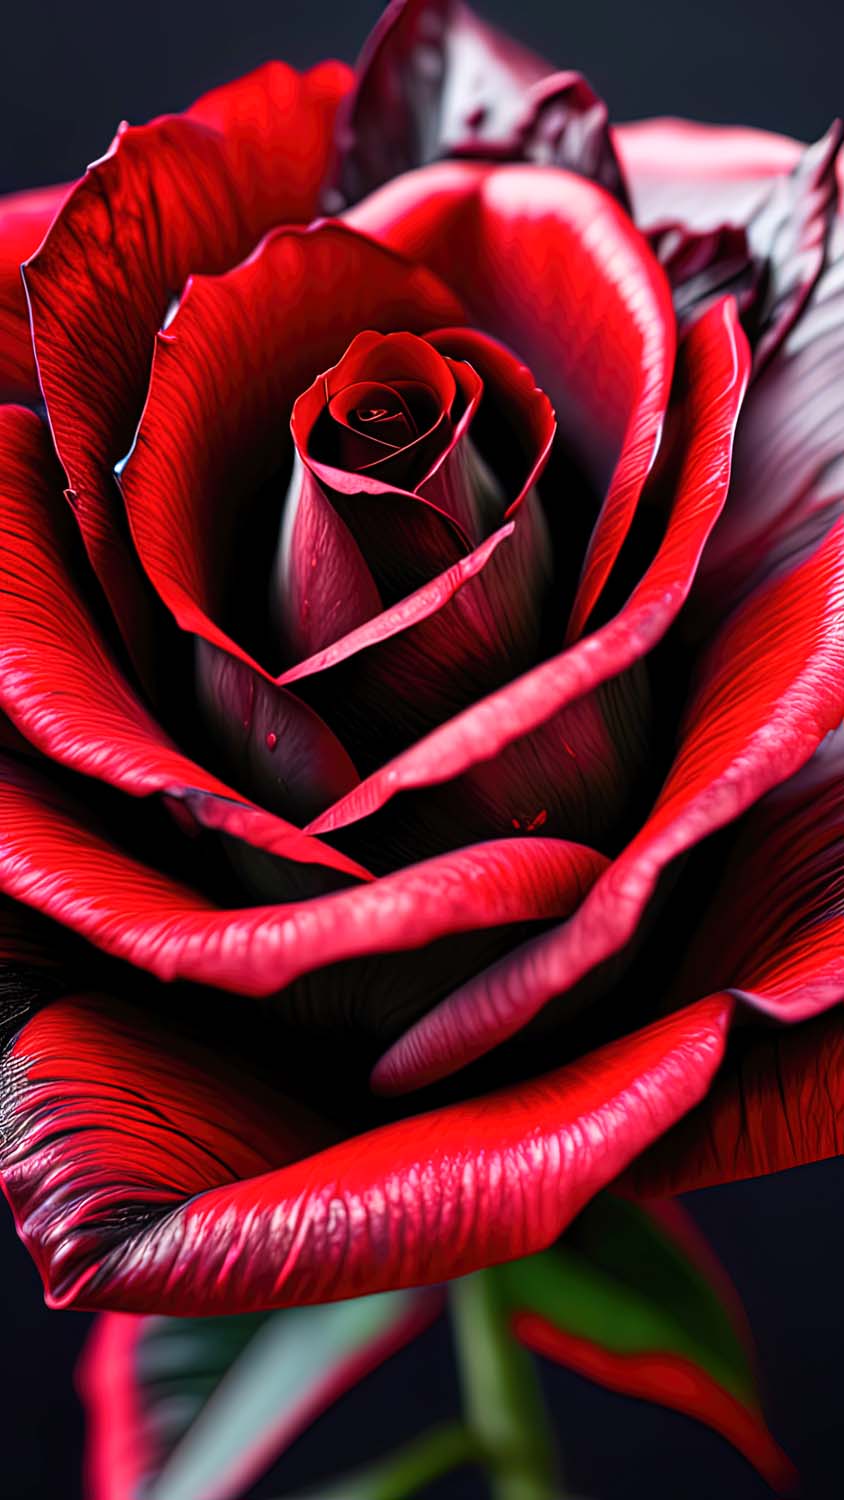 Red Rose Love IPhone Wallpaper HD - IPhone Wallpapers : iPhone Wallpapers